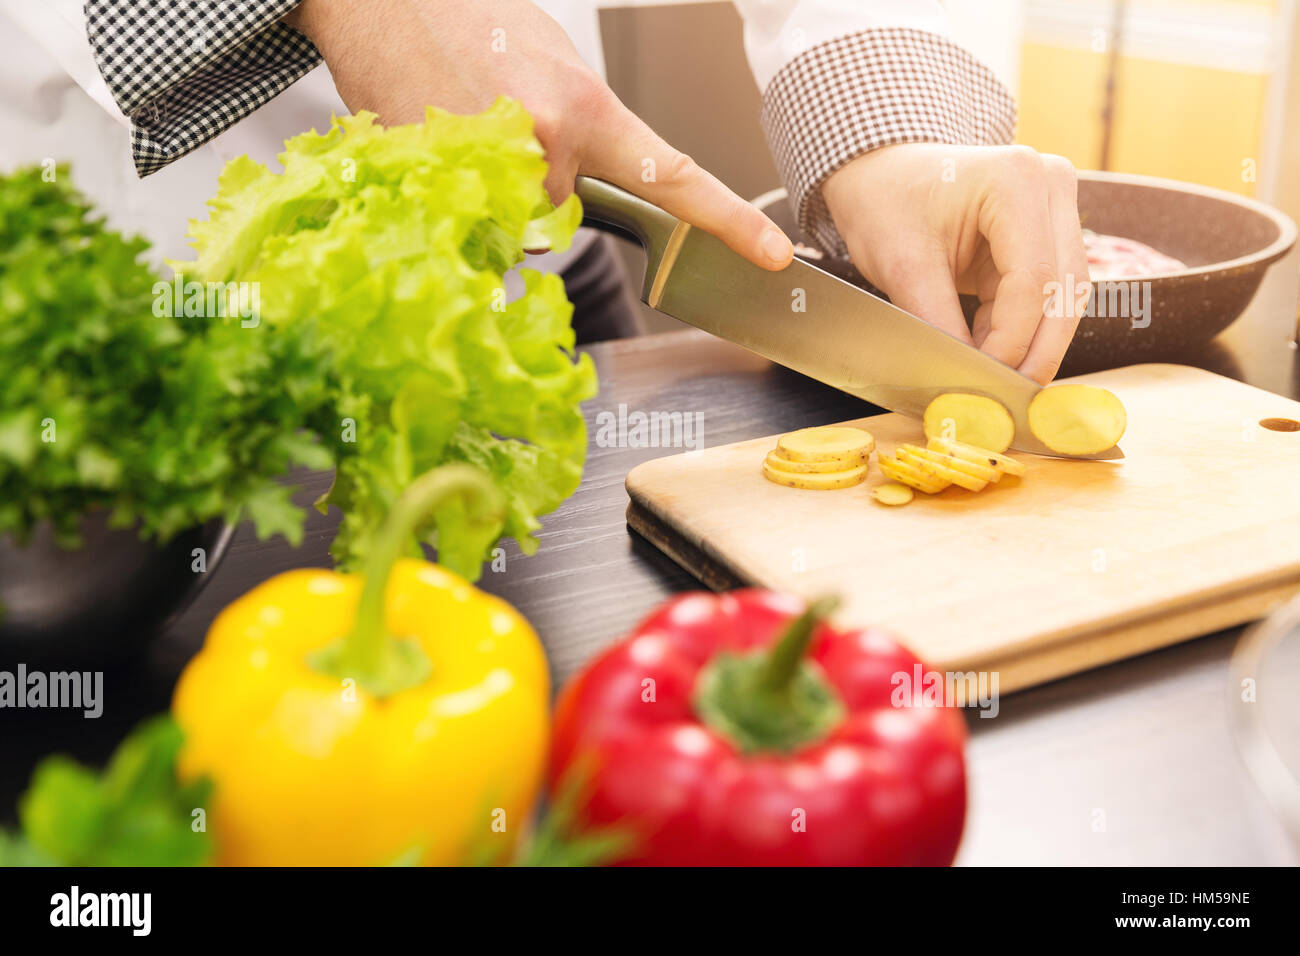 chef slicing potato on wooden board in kitchen Stock Photo